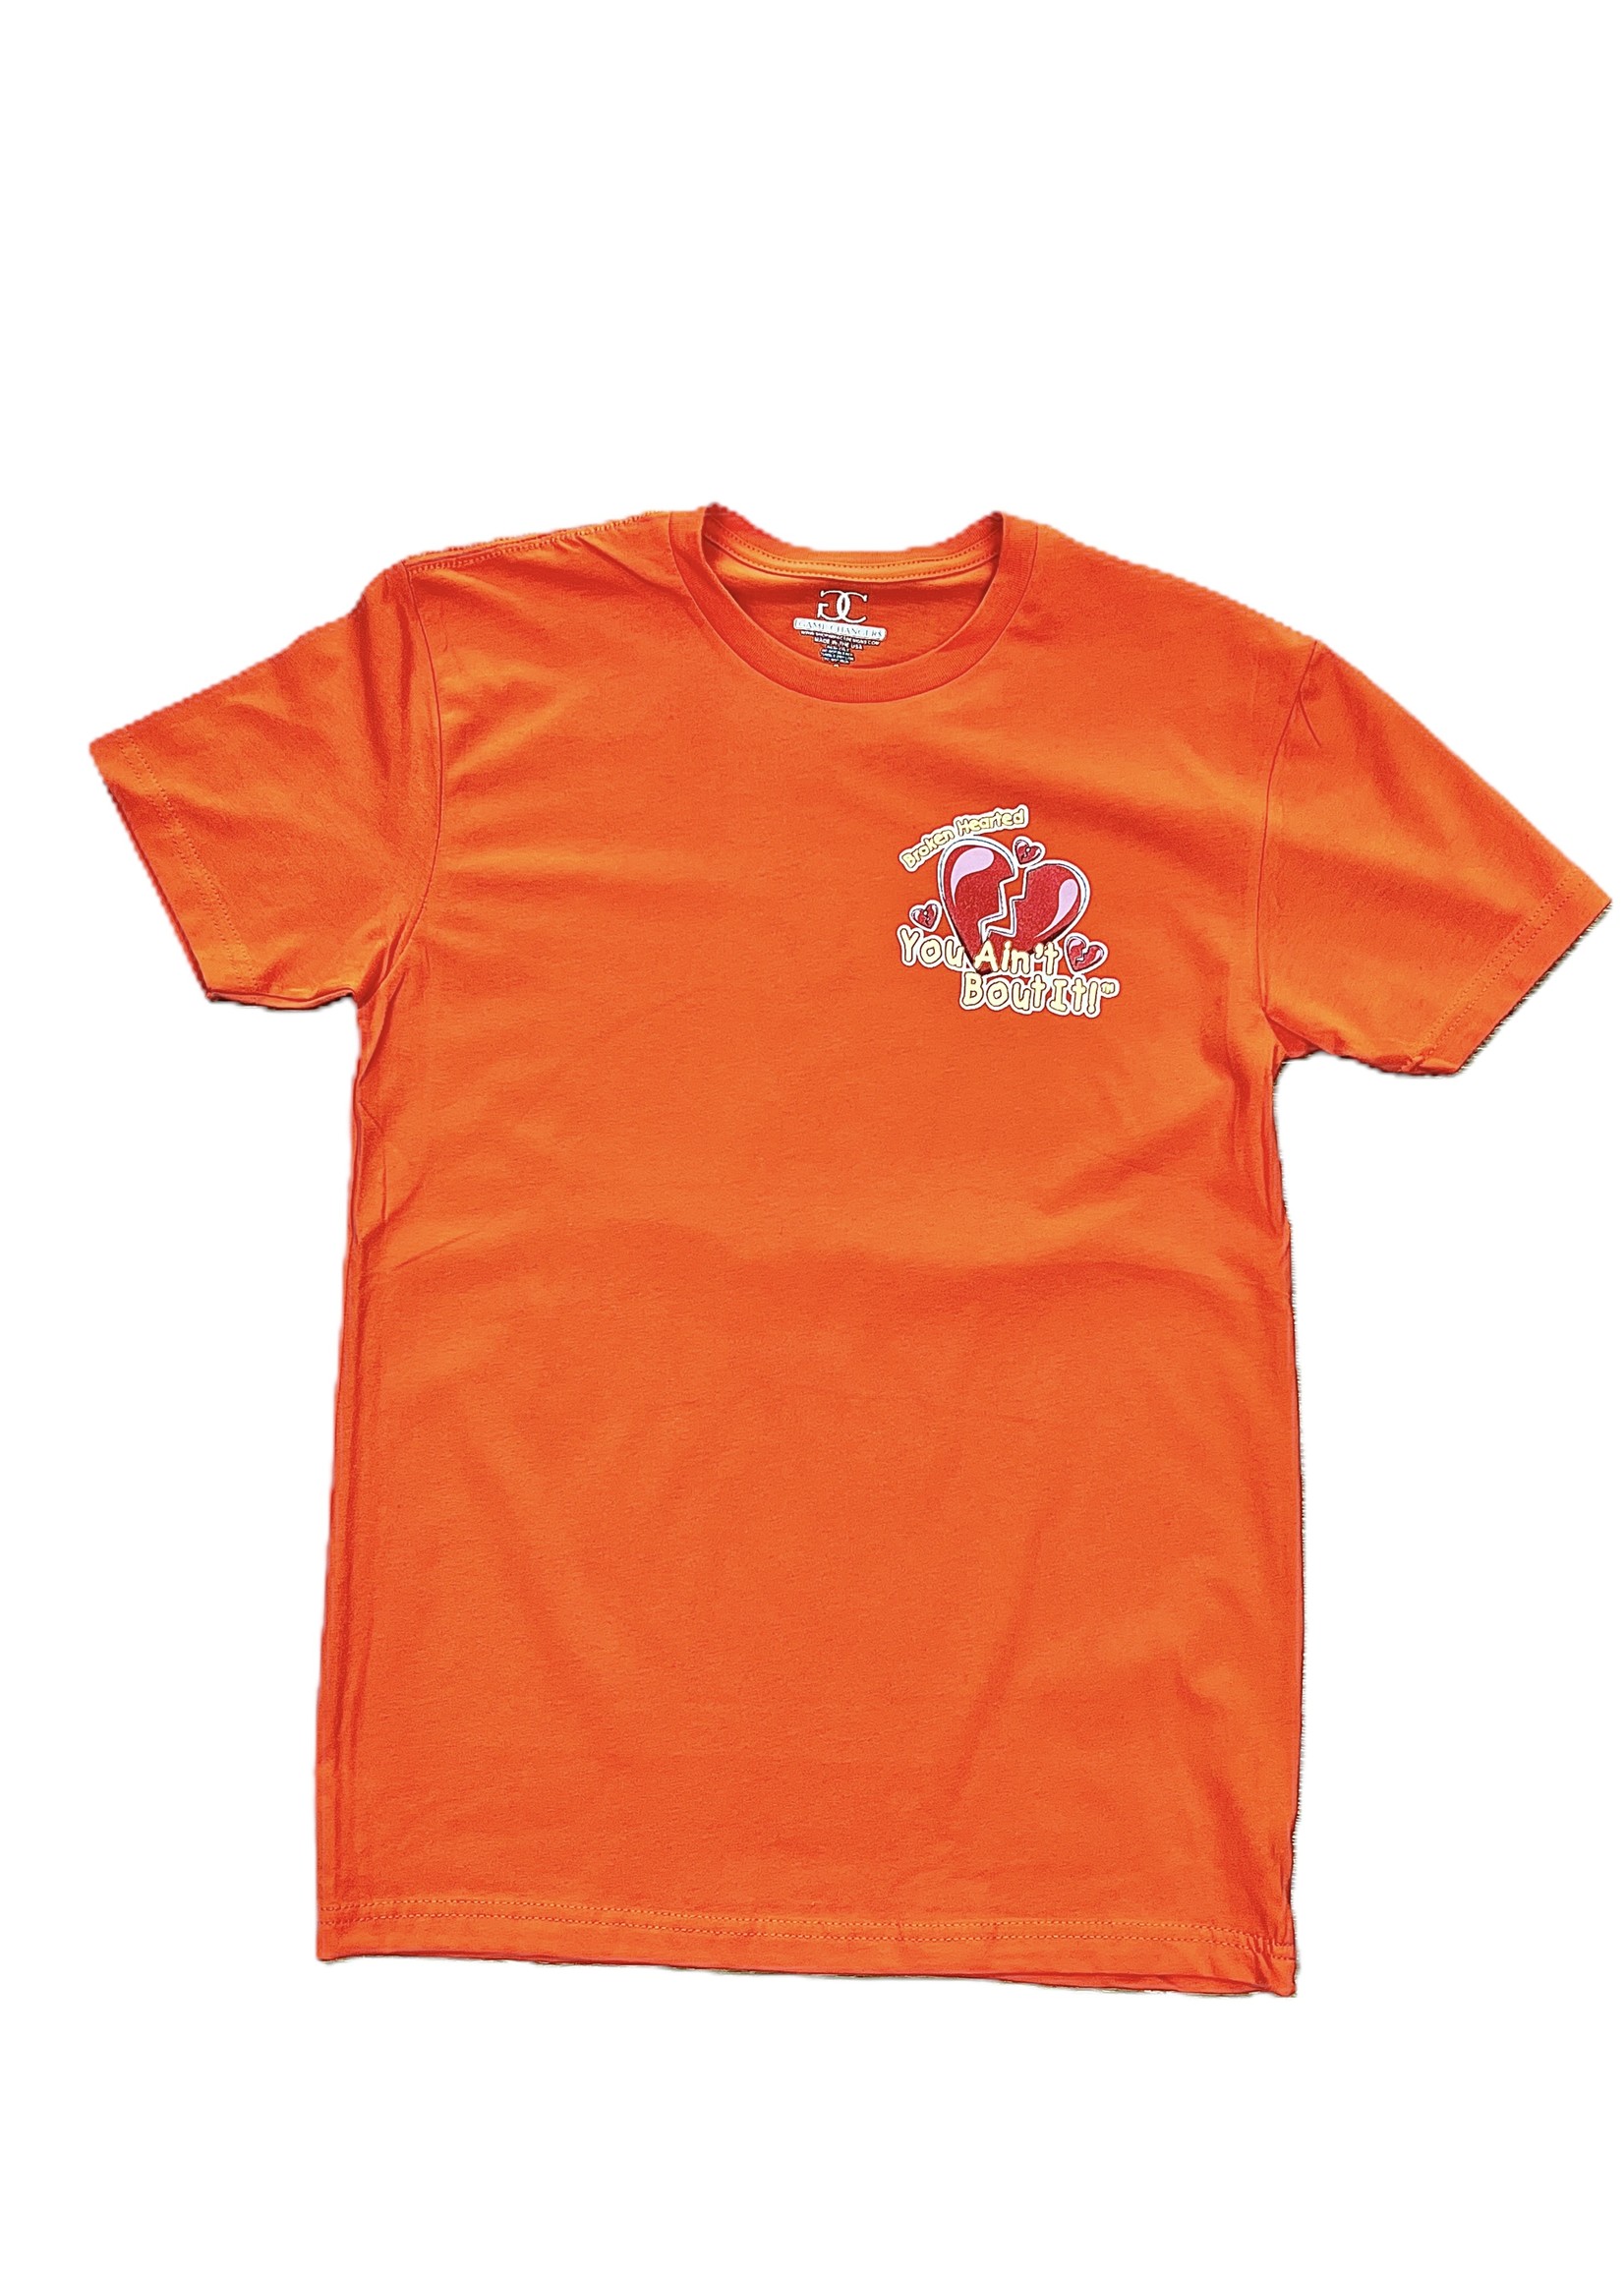 GAME CHANGERS GAME CHANGERS "YOU AIN'T BOUT IT" MEN'S T-SHIRT (Orange)